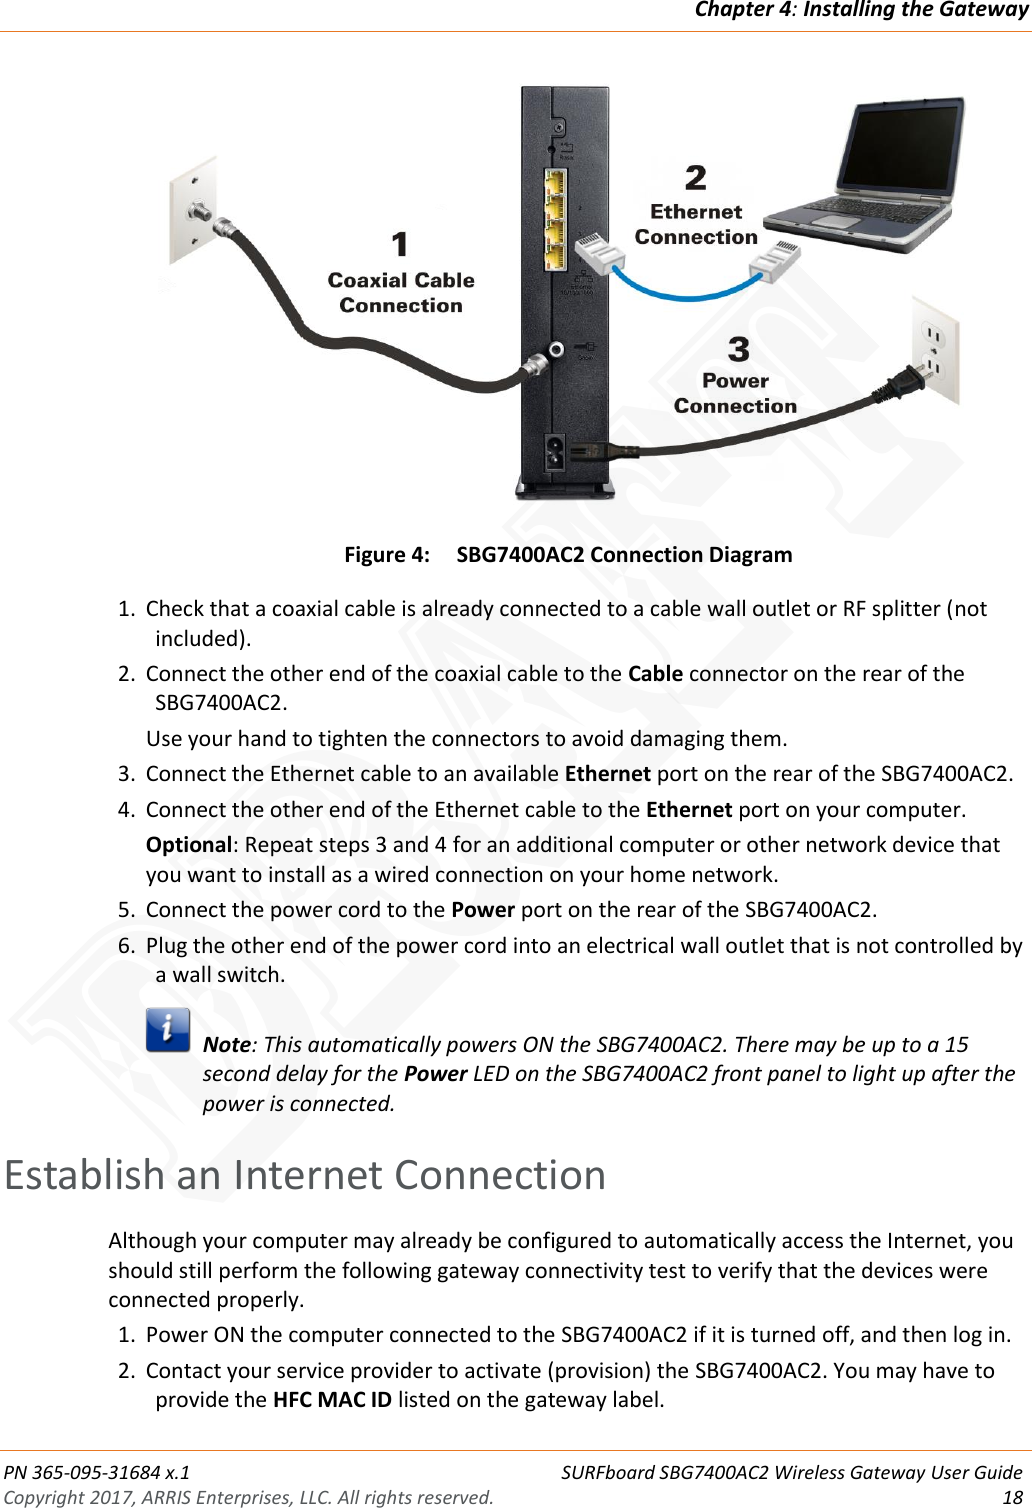 Chapter 4: Installing the Gateway  PN 365-095-31684 x.1 SURFboard SBG7400AC2 Wireless Gateway User Guide Copyright 2017, ARRIS Enterprises, LLC. All rights reserved.    18   Figure 4: SBG7400AC2 Connection Diagram 1. Check that a coaxial cable is already connected to a cable wall outlet or RF splitter (not included). 2. Connect the other end of the coaxial cable to the Cable connector on the rear of the SBG7400AC2. Use your hand to tighten the connectors to avoid damaging them. 3. Connect the Ethernet cable to an available Ethernet port on the rear of the SBG7400AC2. 4. Connect the other end of the Ethernet cable to the Ethernet port on your computer. Optional: Repeat steps 3 and 4 for an additional computer or other network device that you want to install as a wired connection on your home network. 5. Connect the power cord to the Power port on the rear of the SBG7400AC2. 6. Plug the other end of the power cord into an electrical wall outlet that is not controlled by a wall switch.   Note: This automatically powers ON the SBG7400AC2. There may be up to a 15 second delay for the Power LED on the SBG7400AC2 front panel to light up after the power is connected.   Establish an Internet Connection Although your computer may already be configured to automatically access the Internet, you should still perform the following gateway connectivity test to verify that the devices were connected properly. 1. Power ON the computer connected to the SBG7400AC2 if it is turned off, and then log in. 2. Contact your service provider to activate (provision) the SBG7400AC2. You may have to provide the HFC MAC ID listed on the gateway label. DRAFT